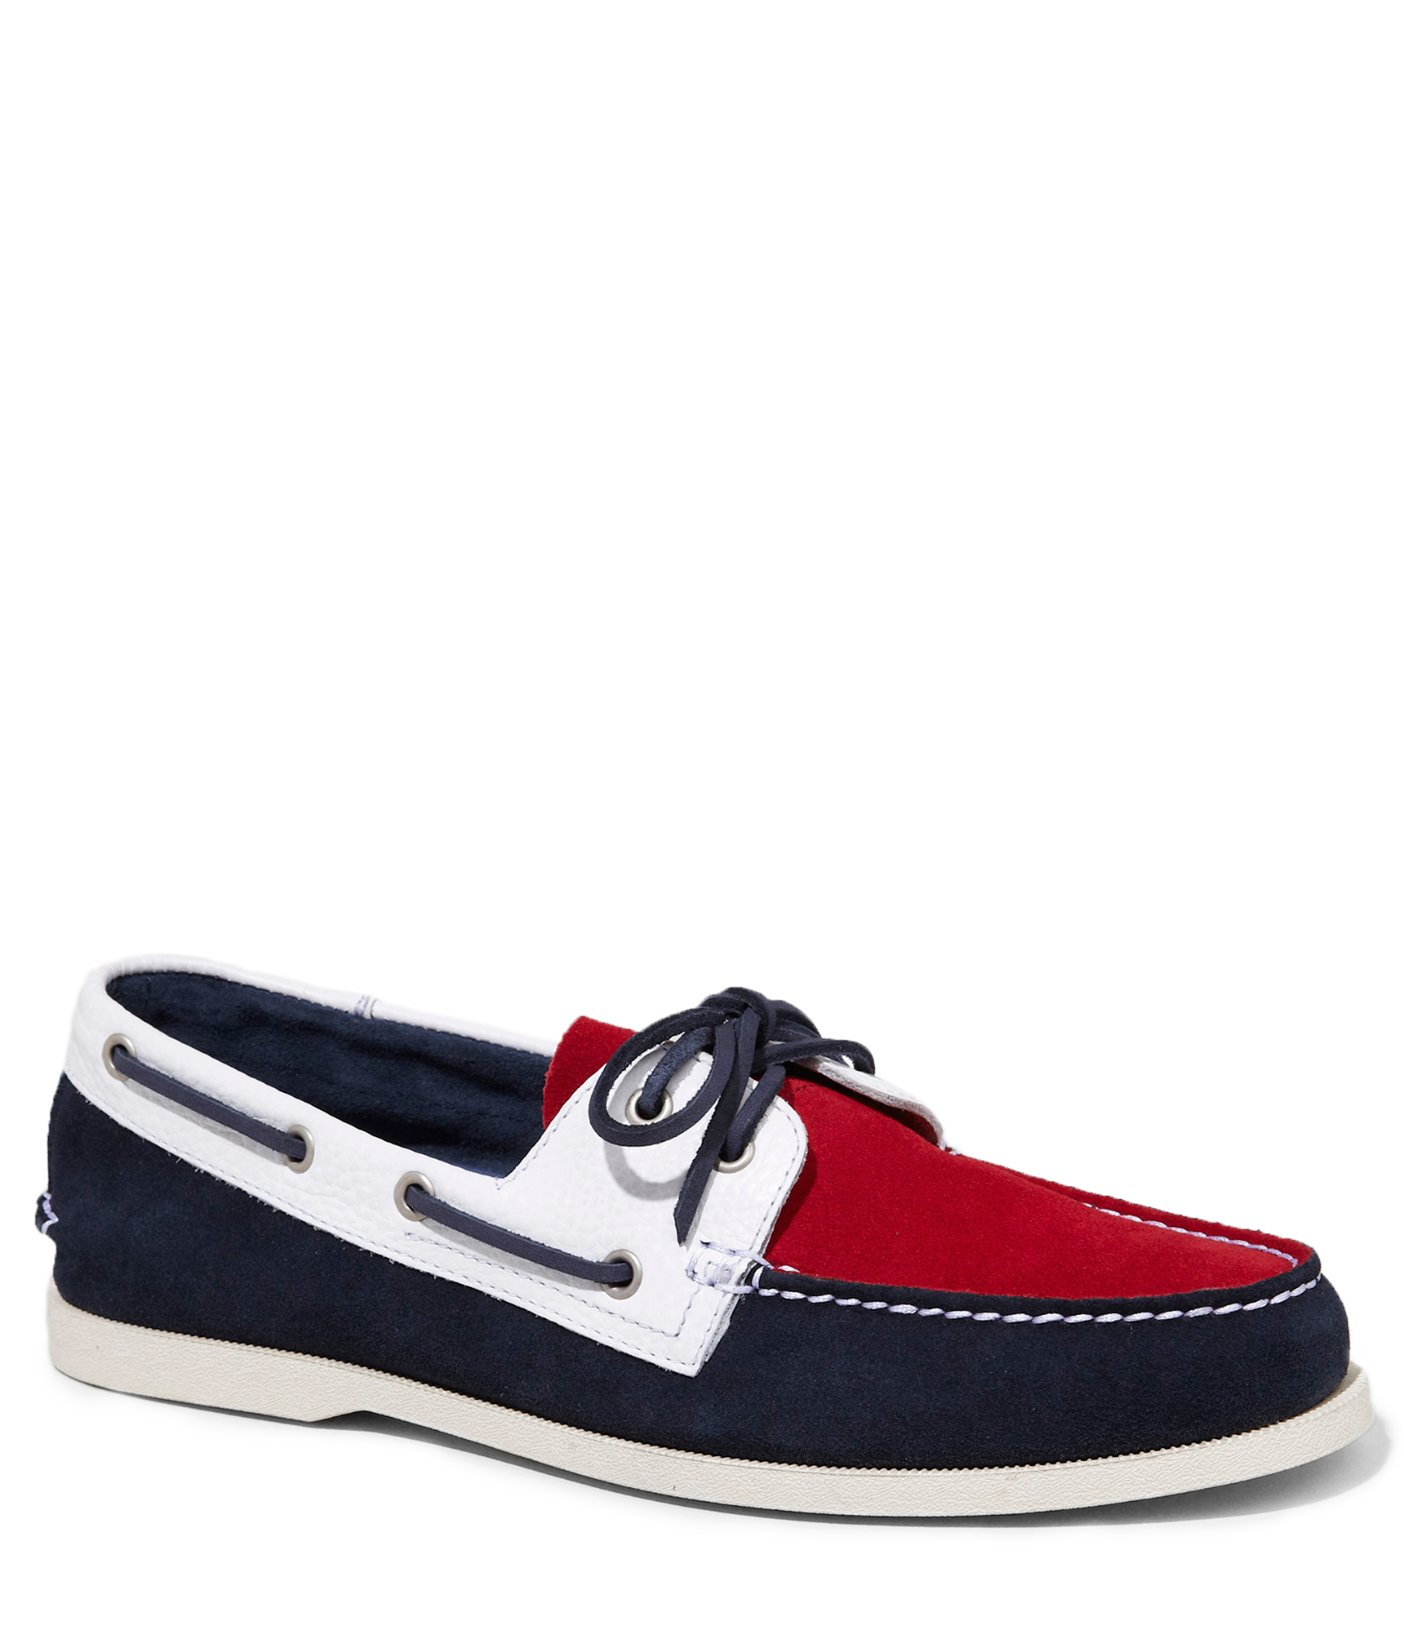 colorful boat shoes